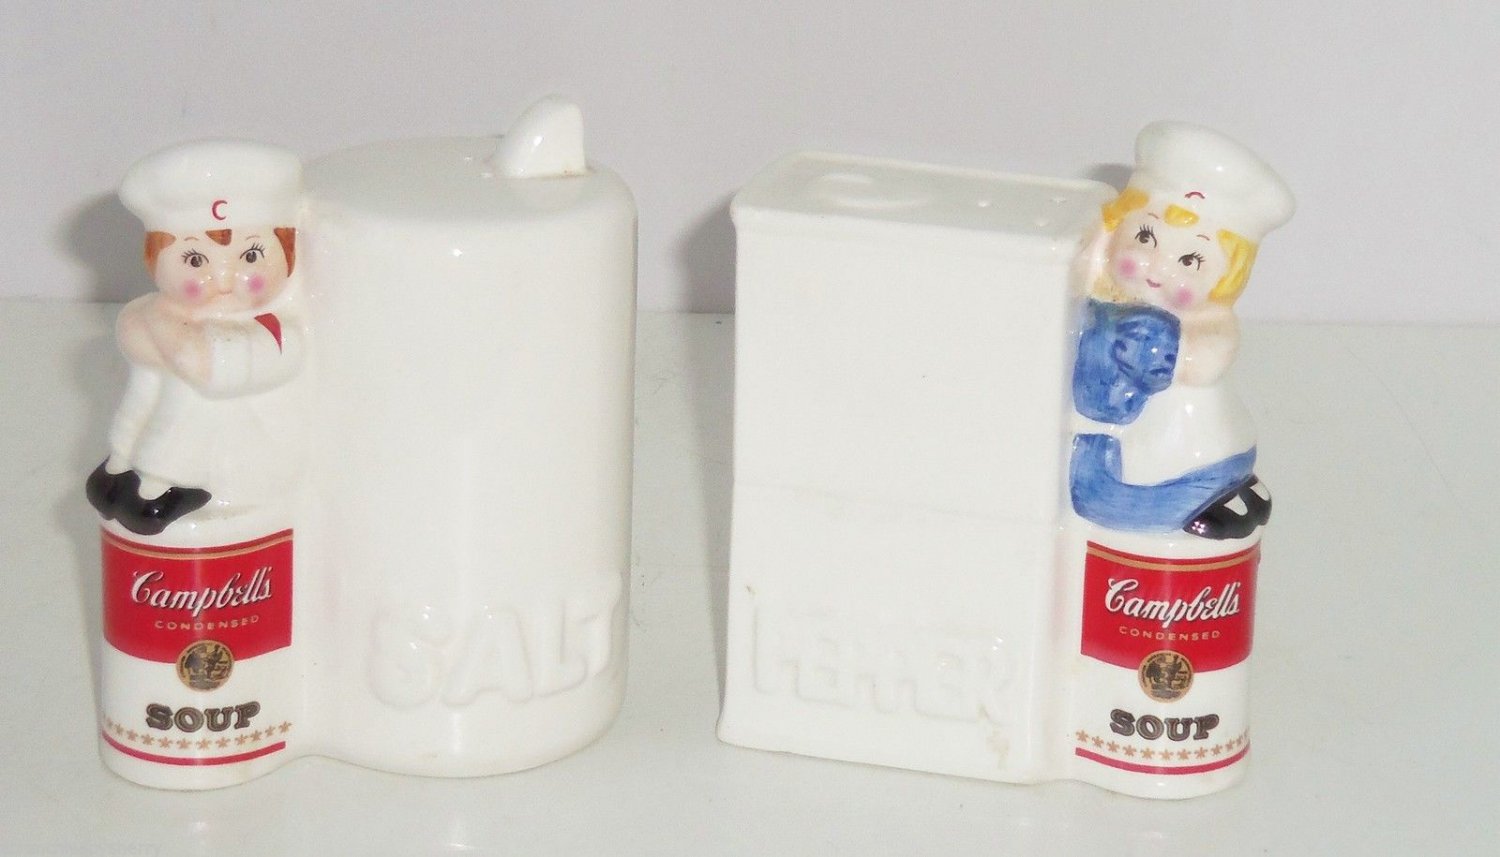 When Were The Plastic Campbell Soup Kids Salt And Pepper Shakers Made?